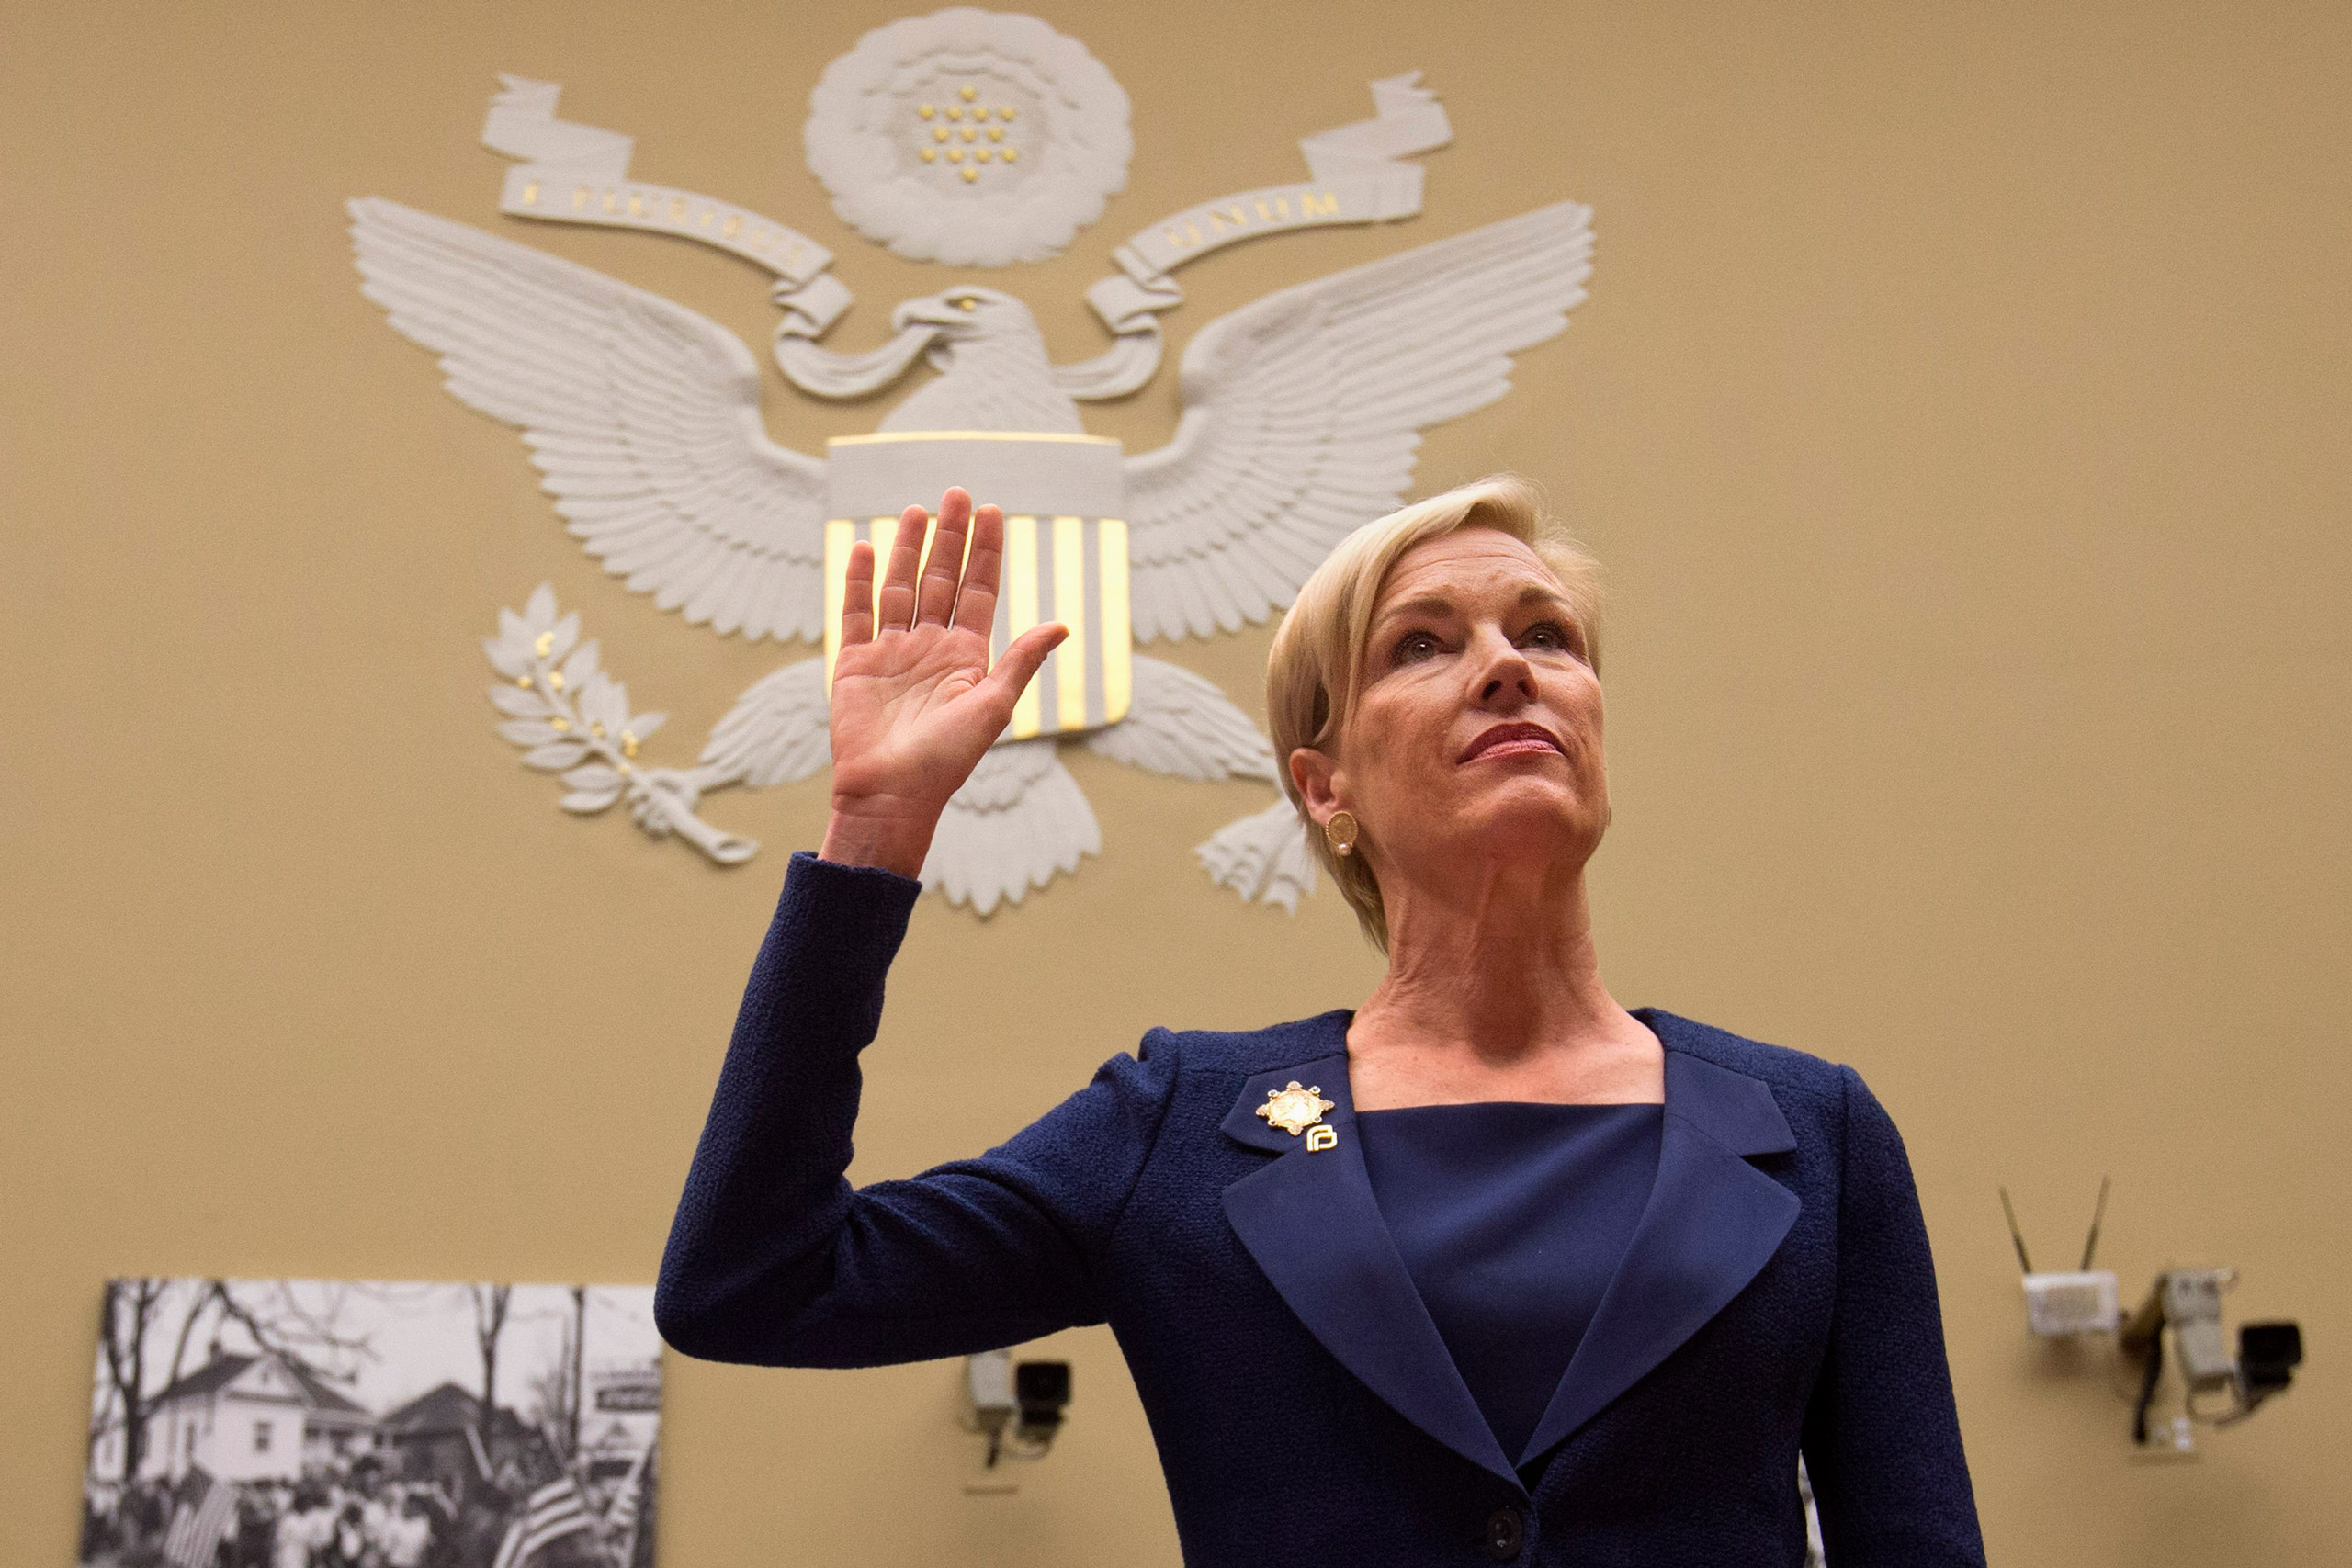 Planned Parenthood Federation of America President Cecile Richards is sworn in prior to testifying before the House Oversight and Government Reform Committee hearing in Washington on Sept. 29, 2015. (Jacquelyn Martin—AP)